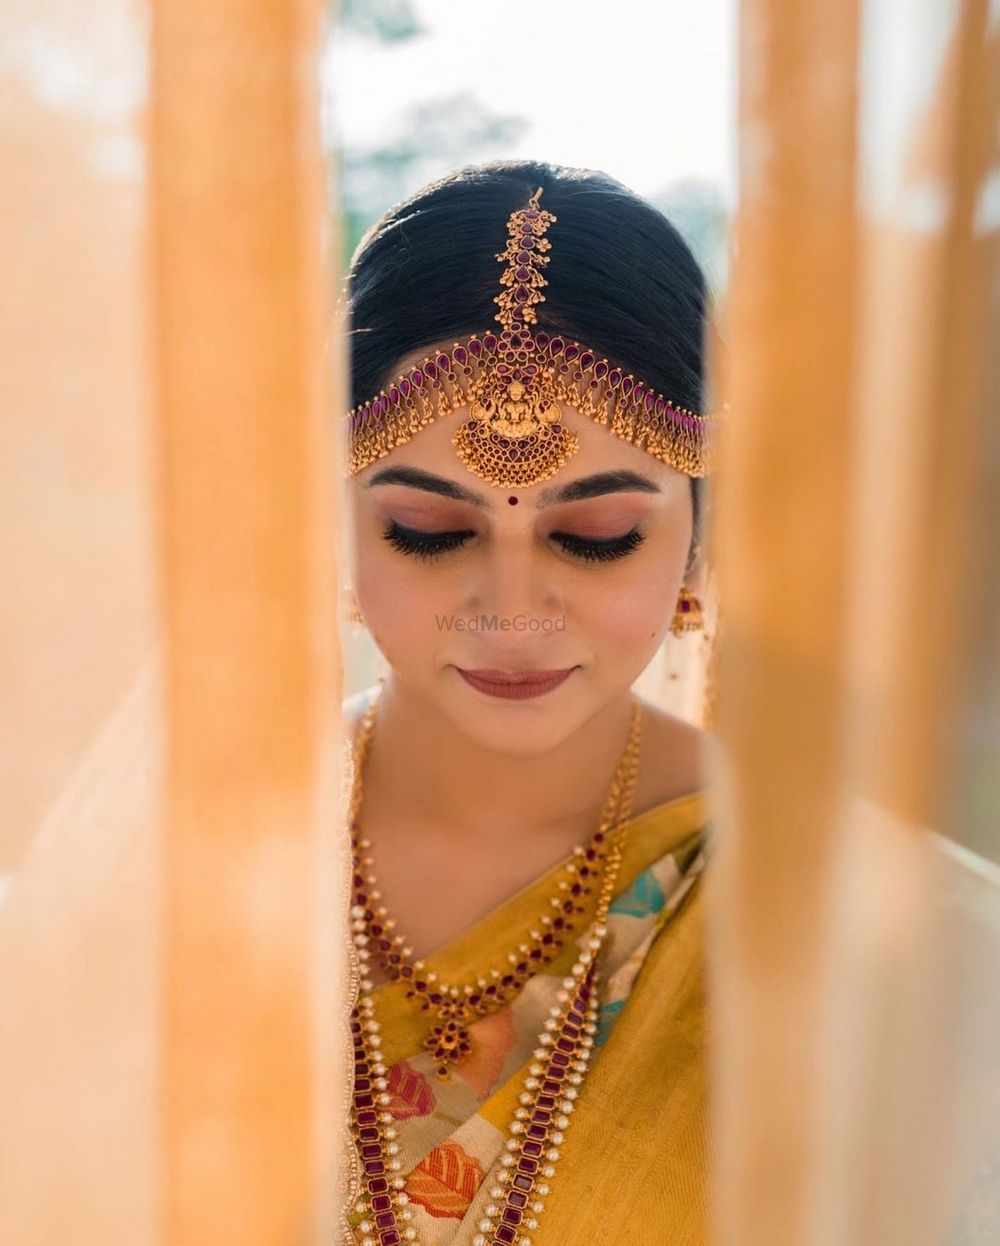 Photo By Looks Unlocked by Sonam - Bridal Makeup